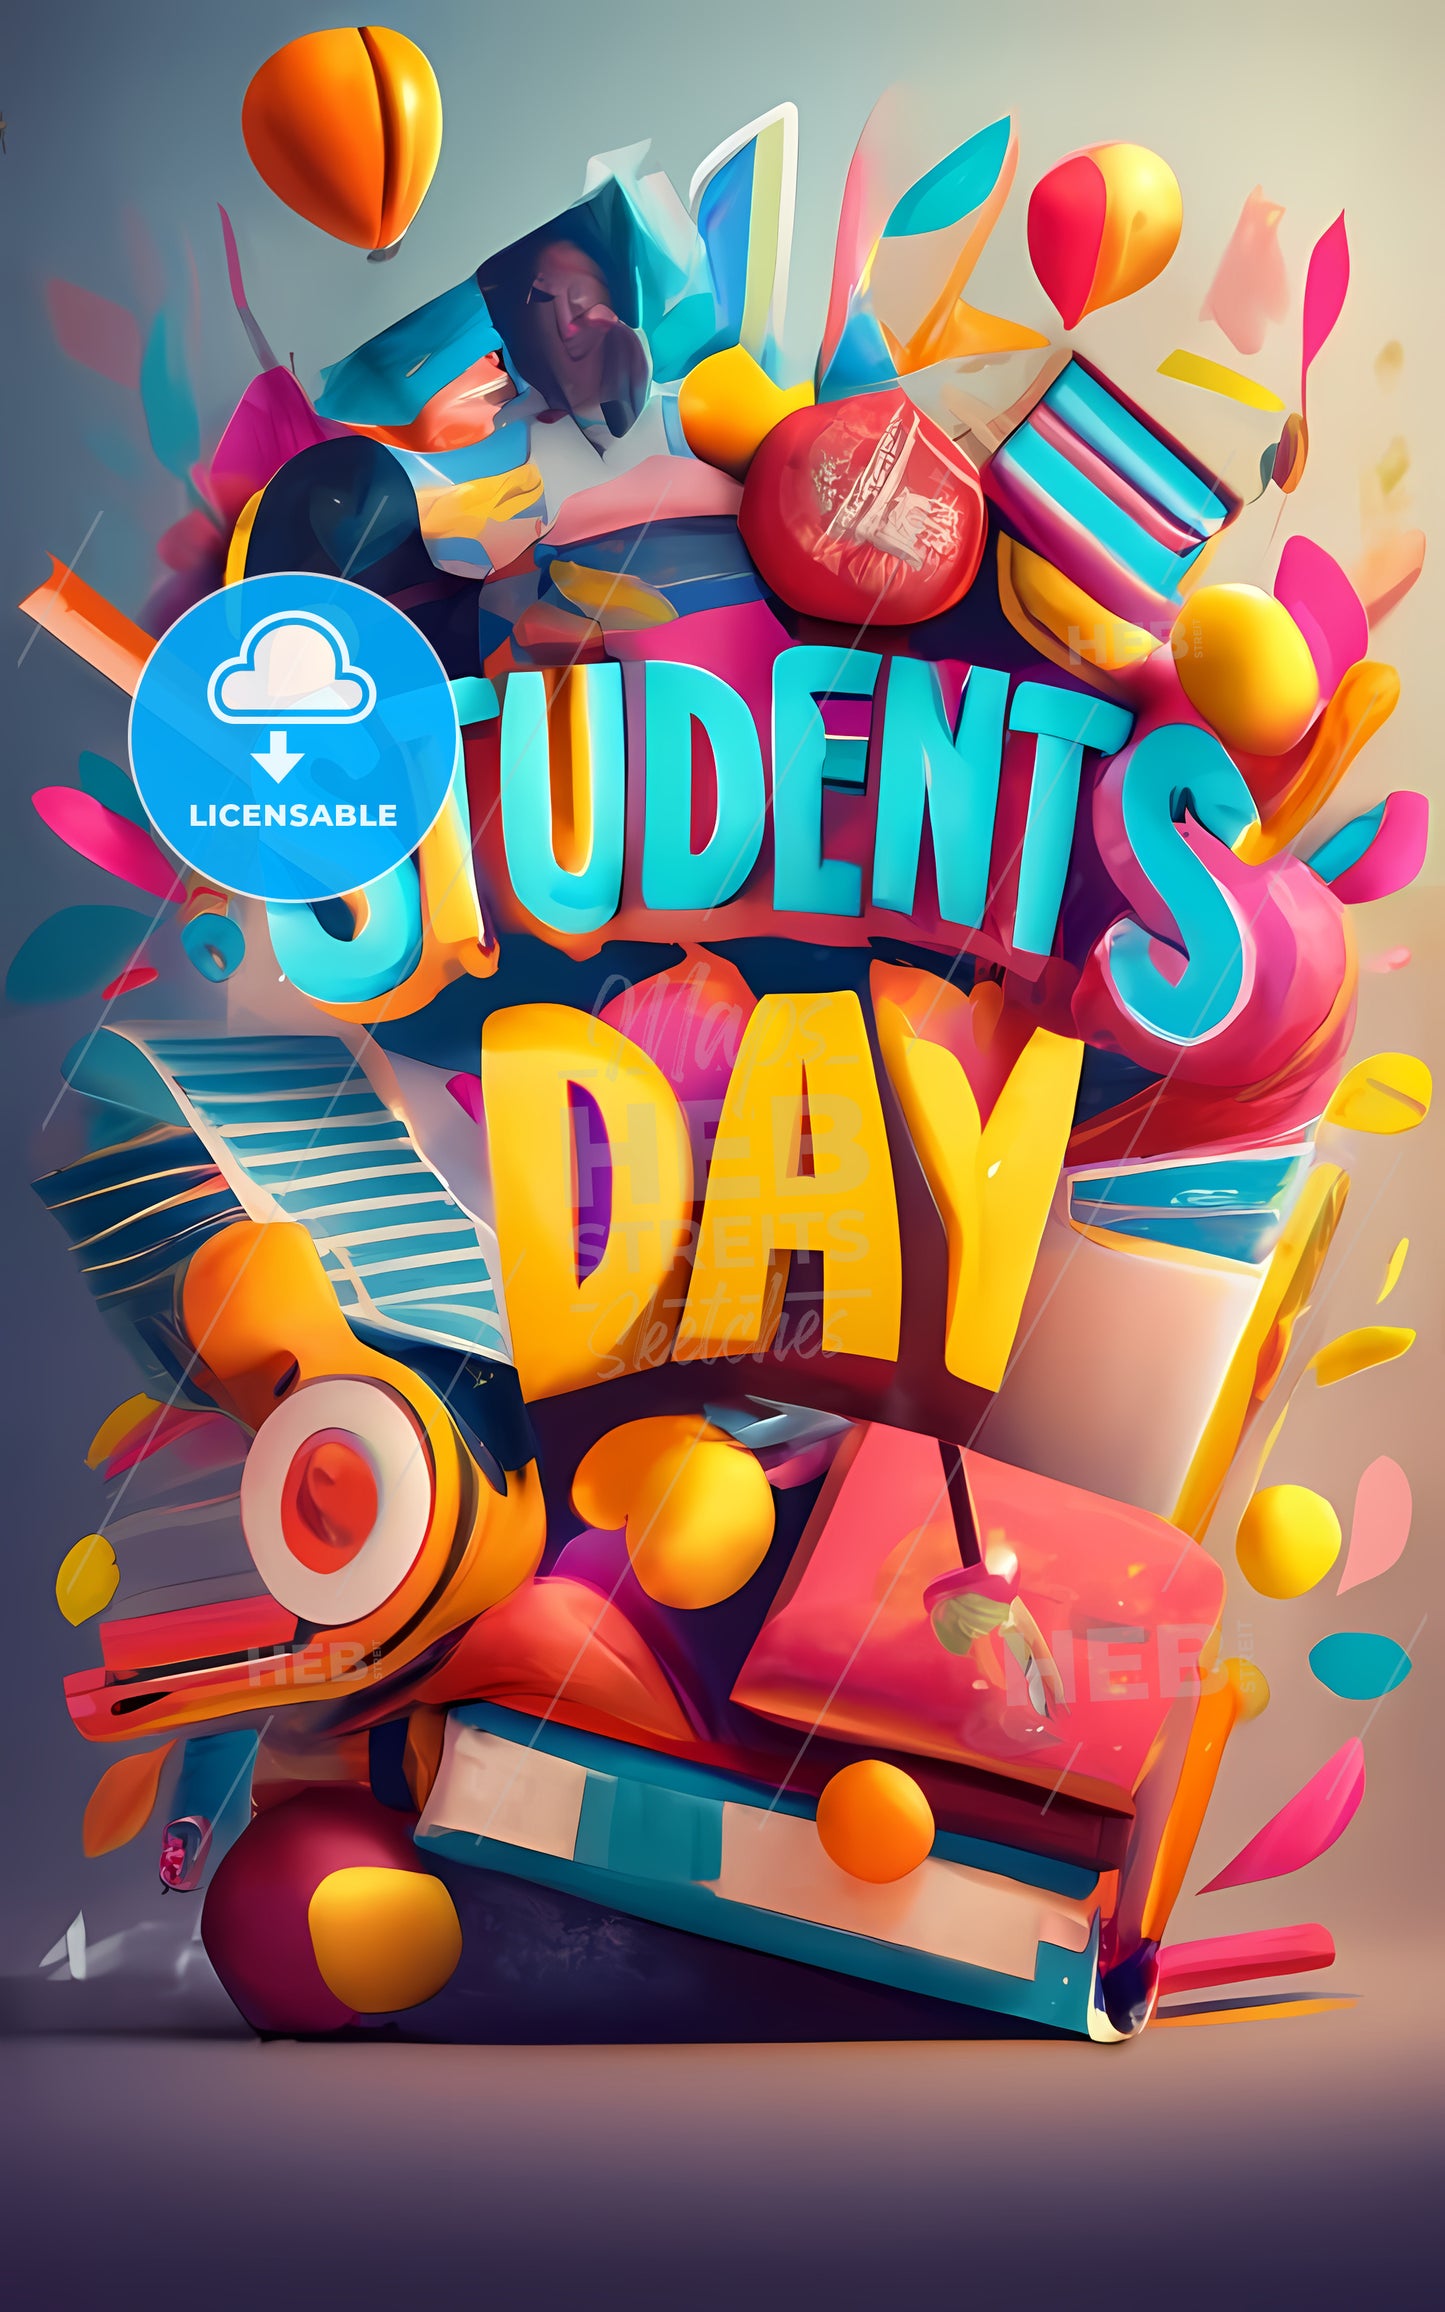 Students Day - A Group Of Colorful Objects